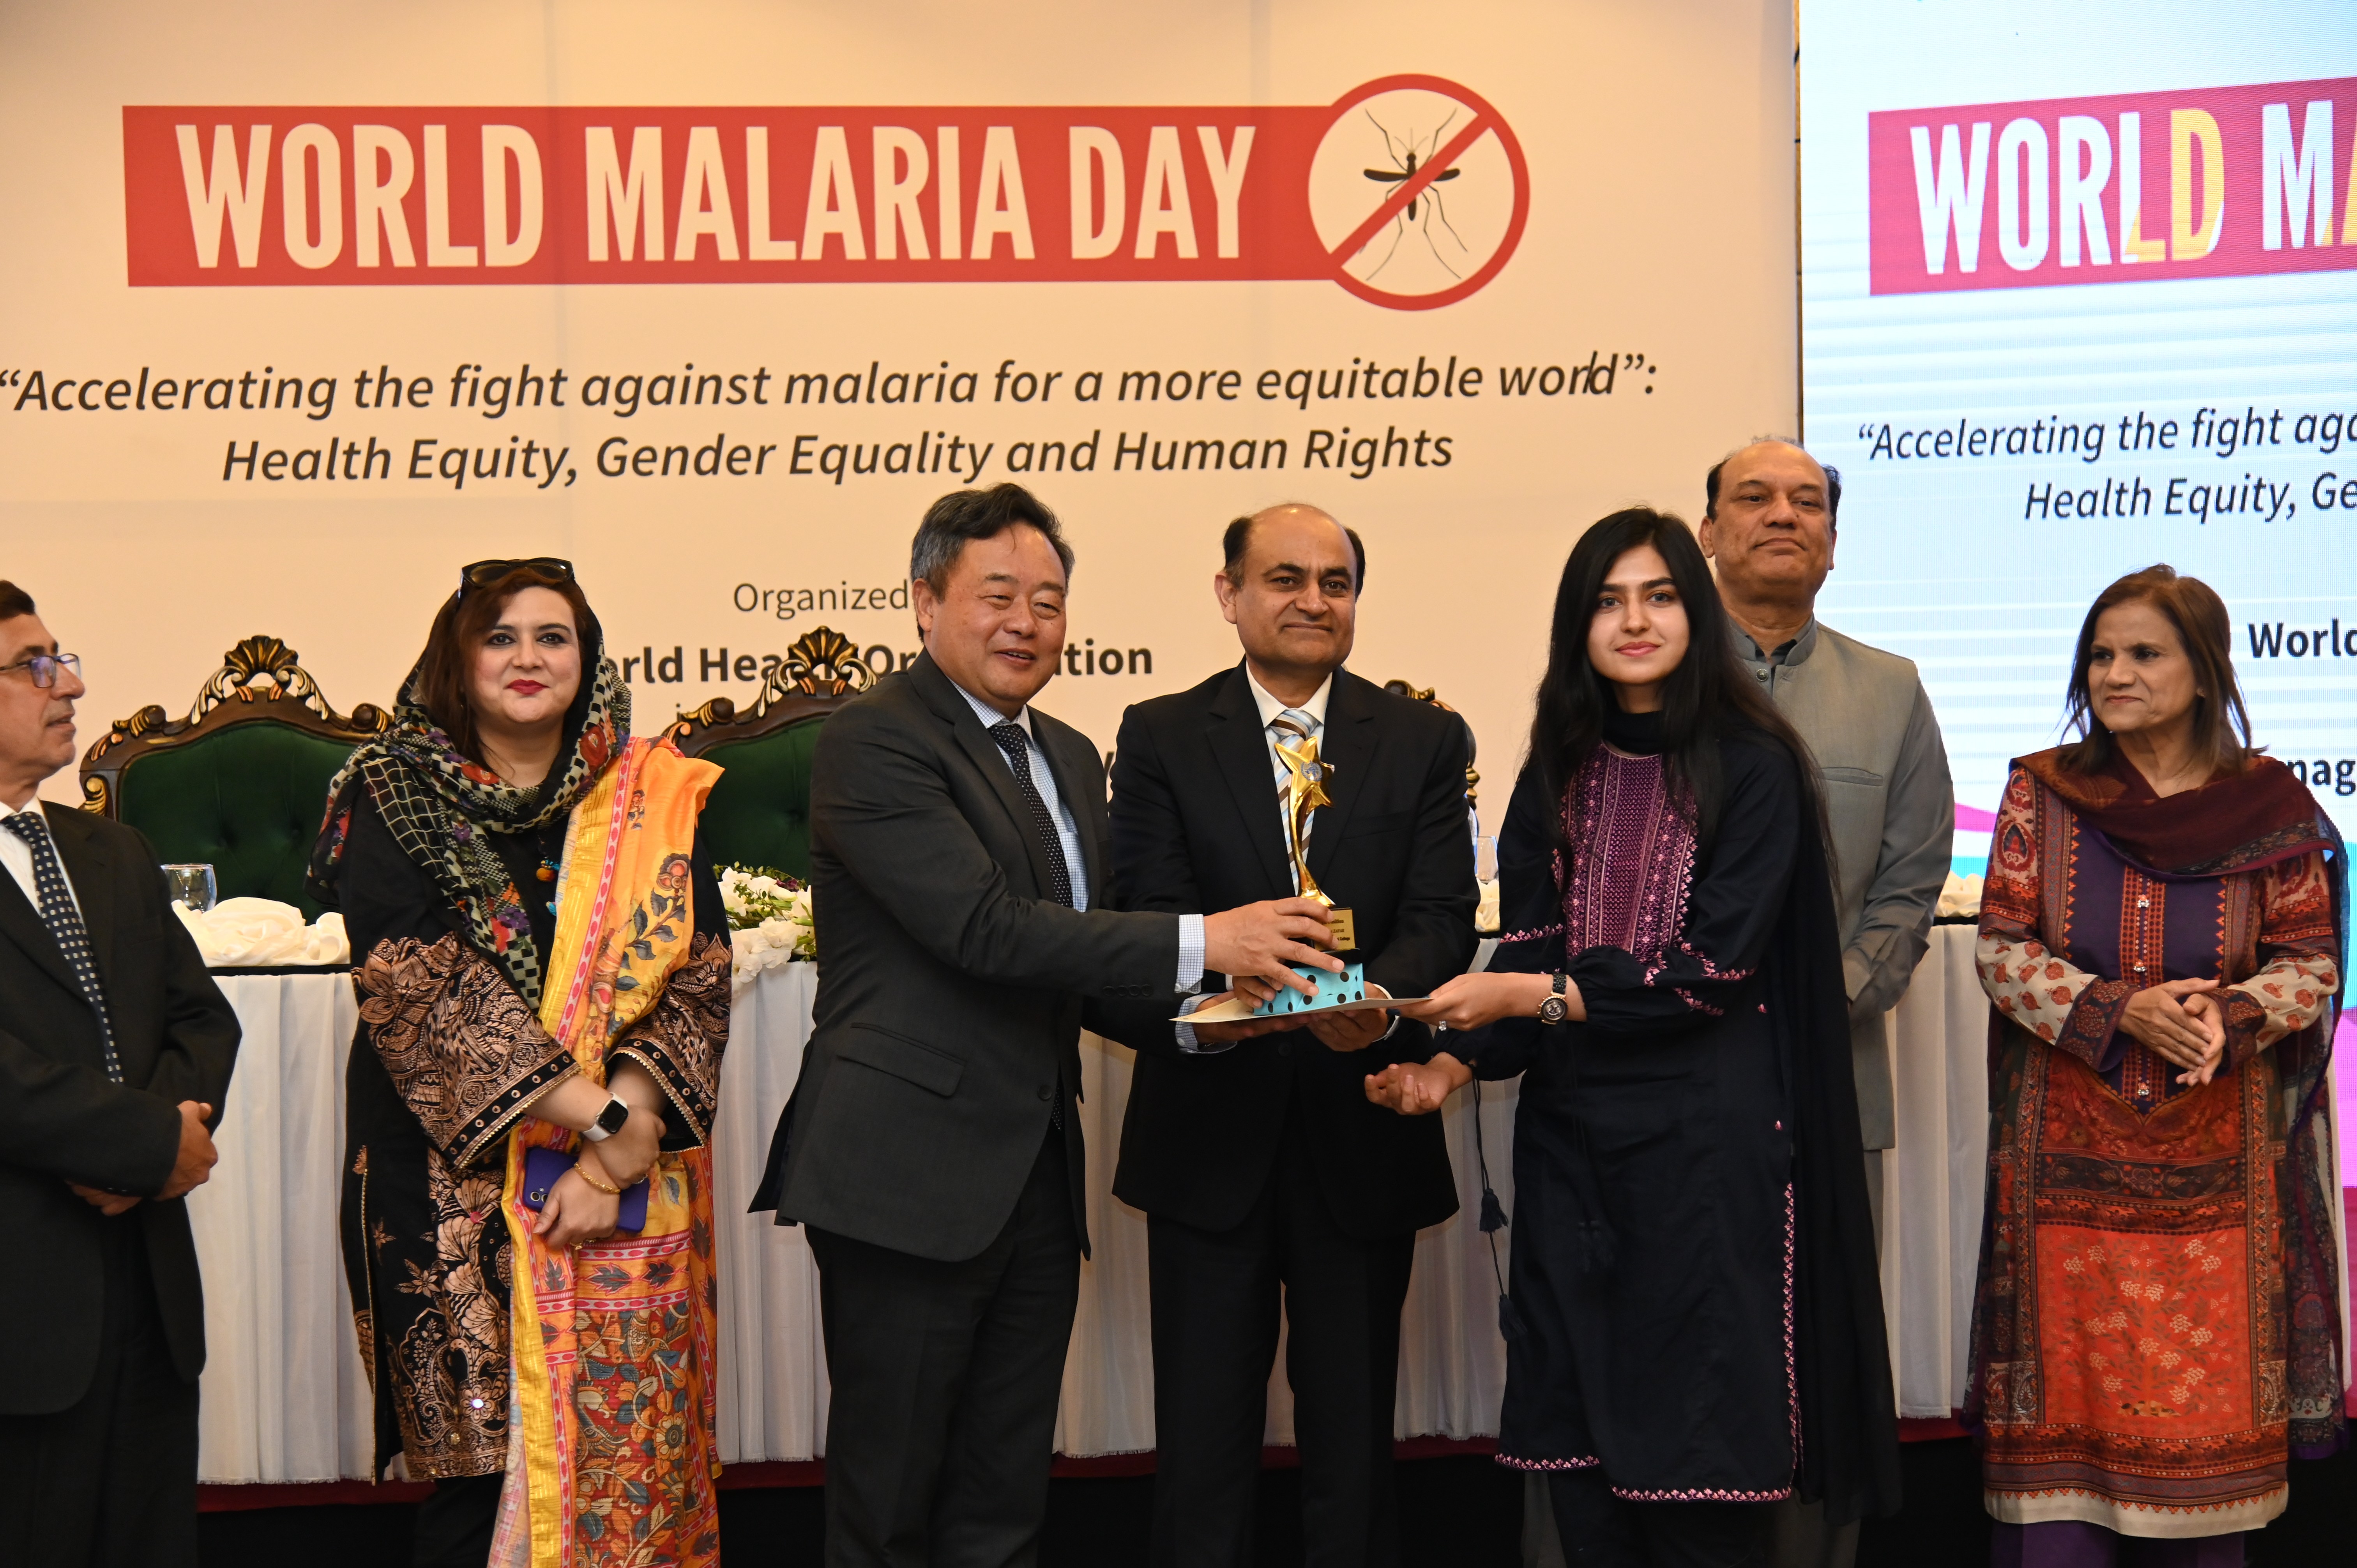 The shield distribution at the event of World Malaria Day 2025